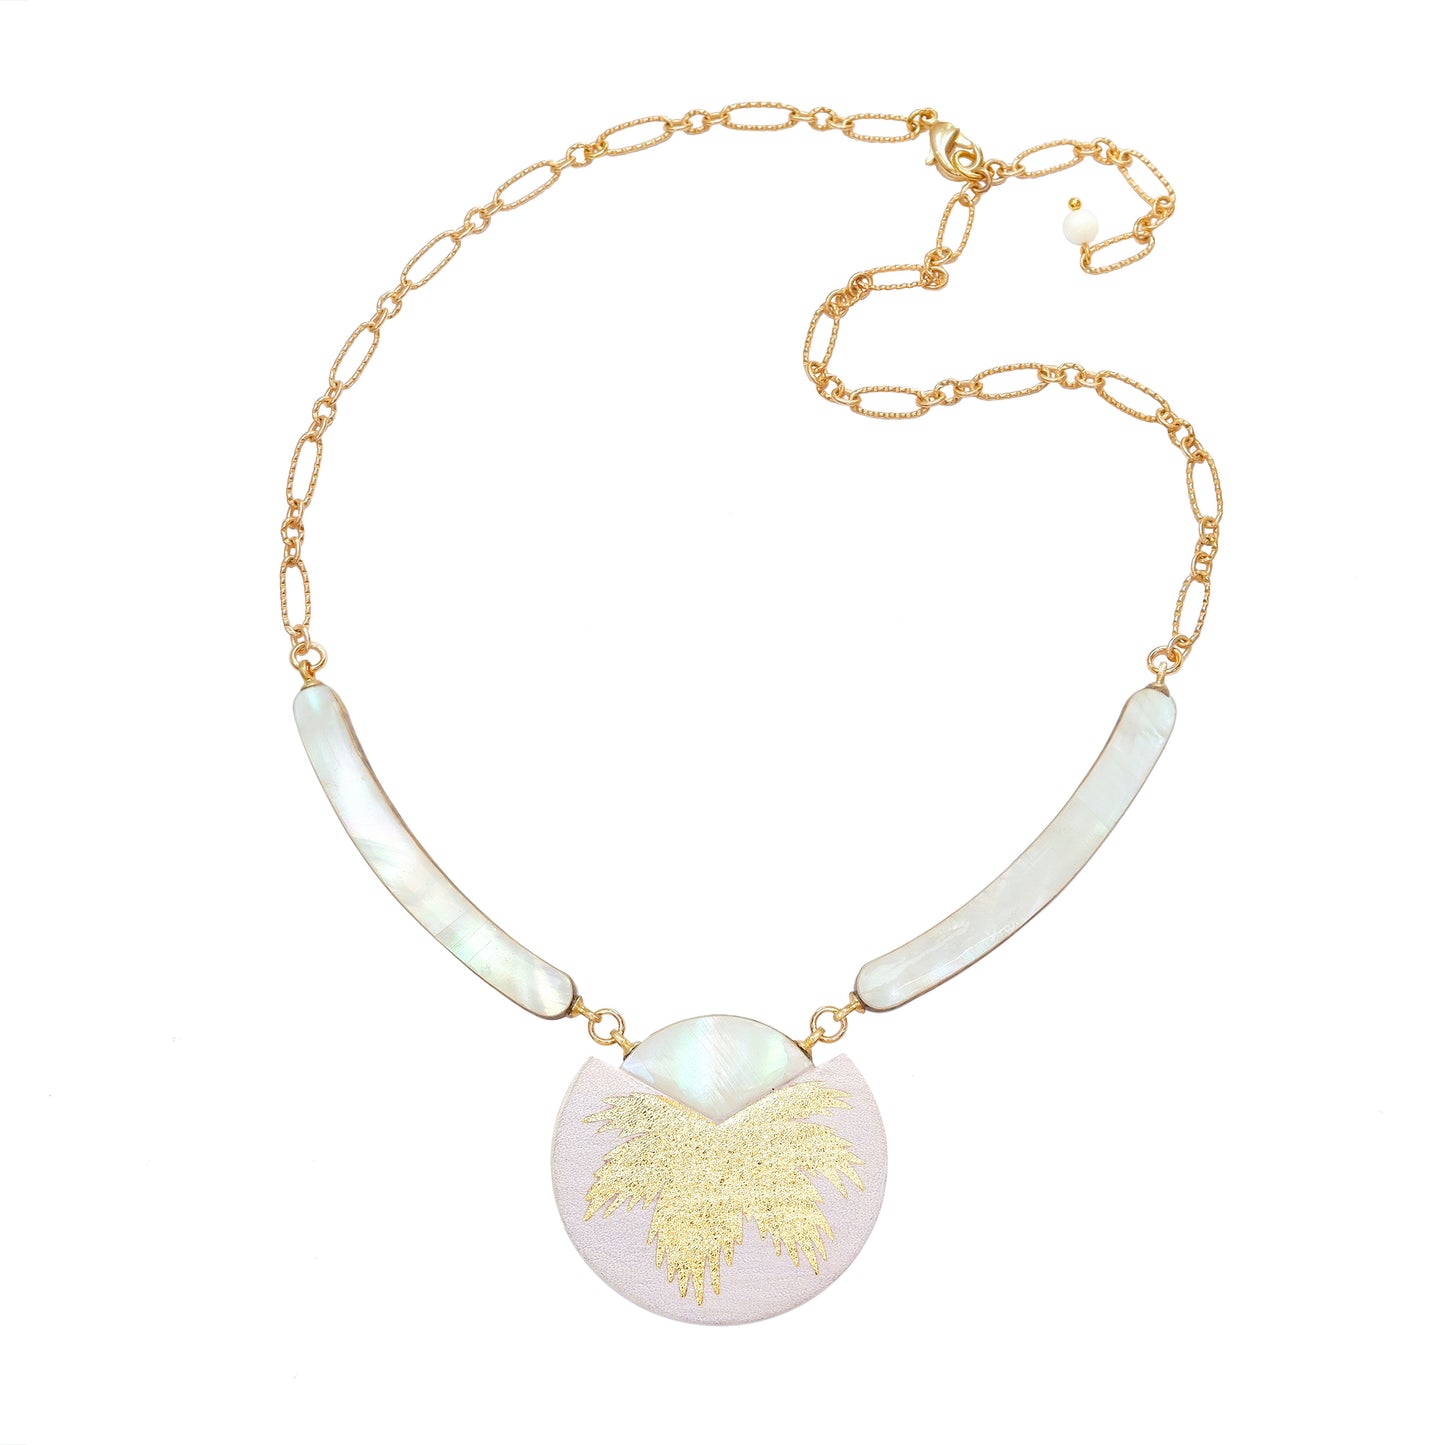 necklace with curved mother of pearl bars , lilac leather medallion with a gold palm print